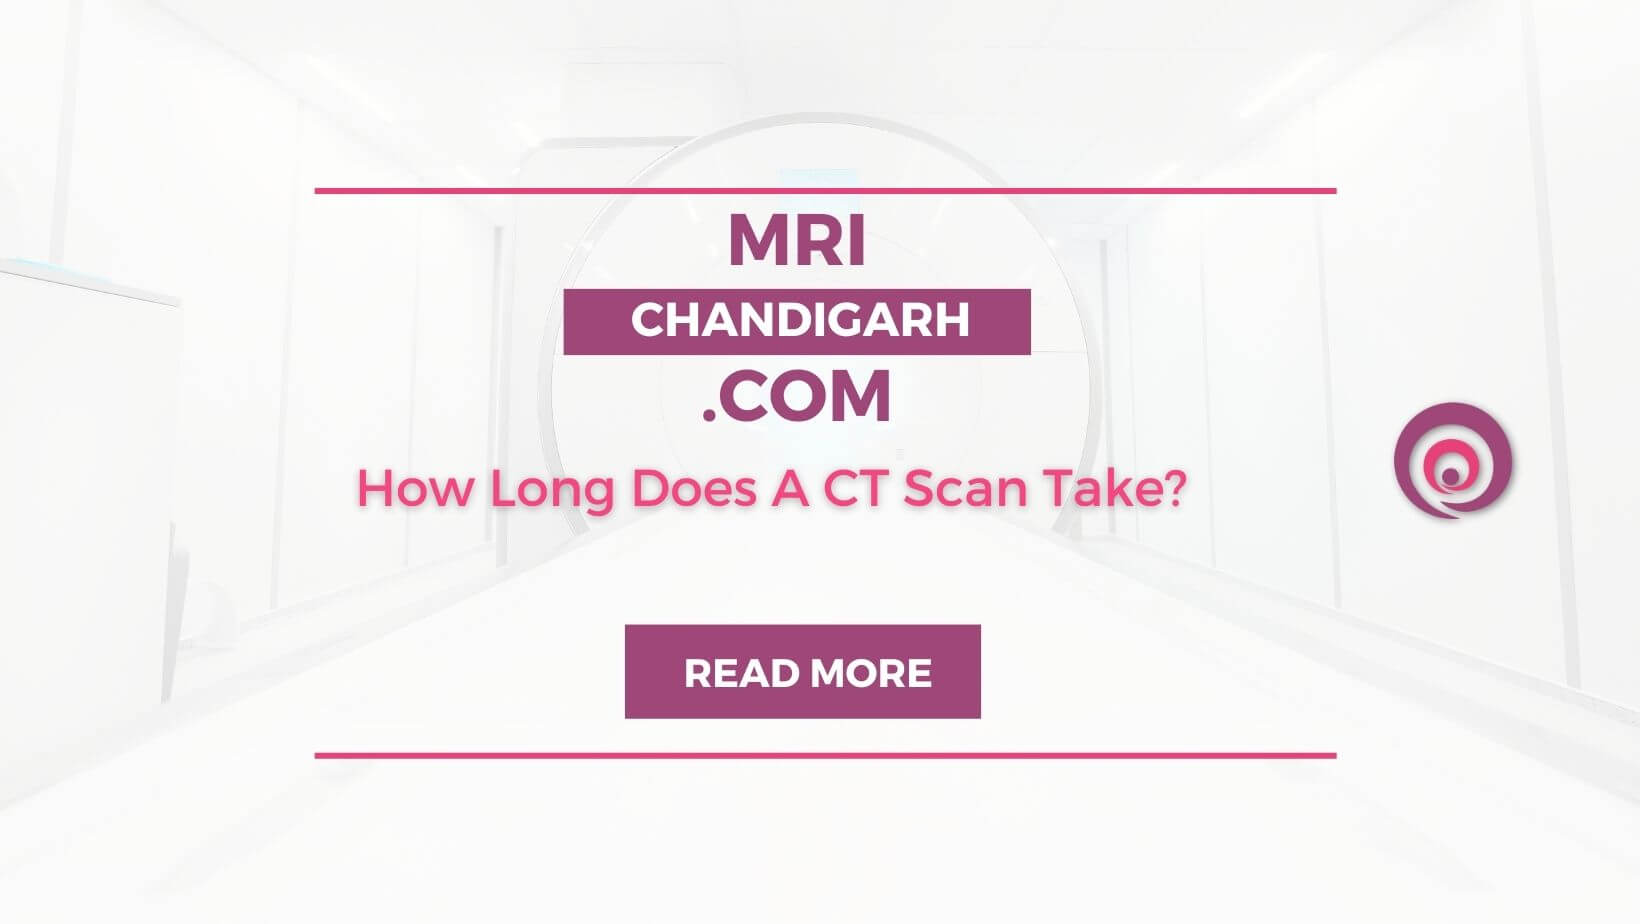 How Long Does A CT Scan Take?